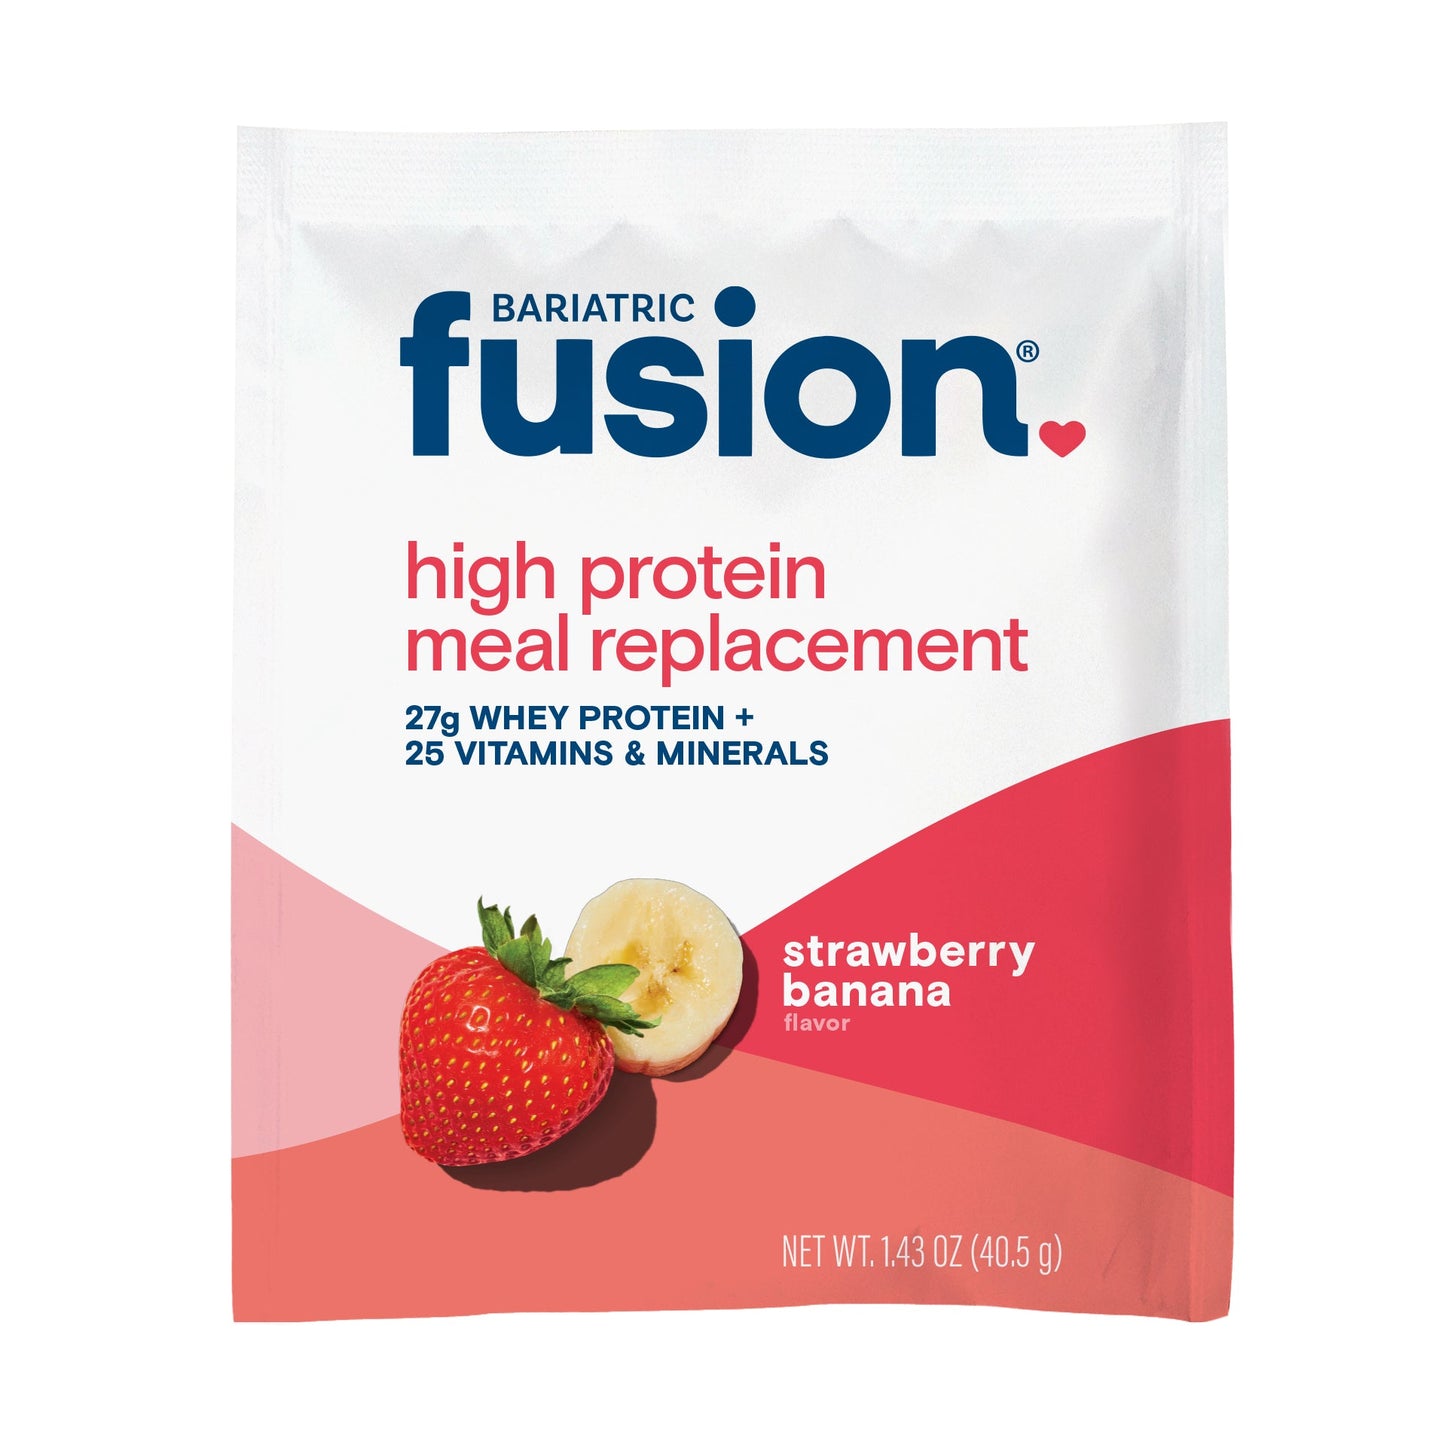 Bariatric Fusion Strawberry Banana High Protein Meal Replacement single serving.